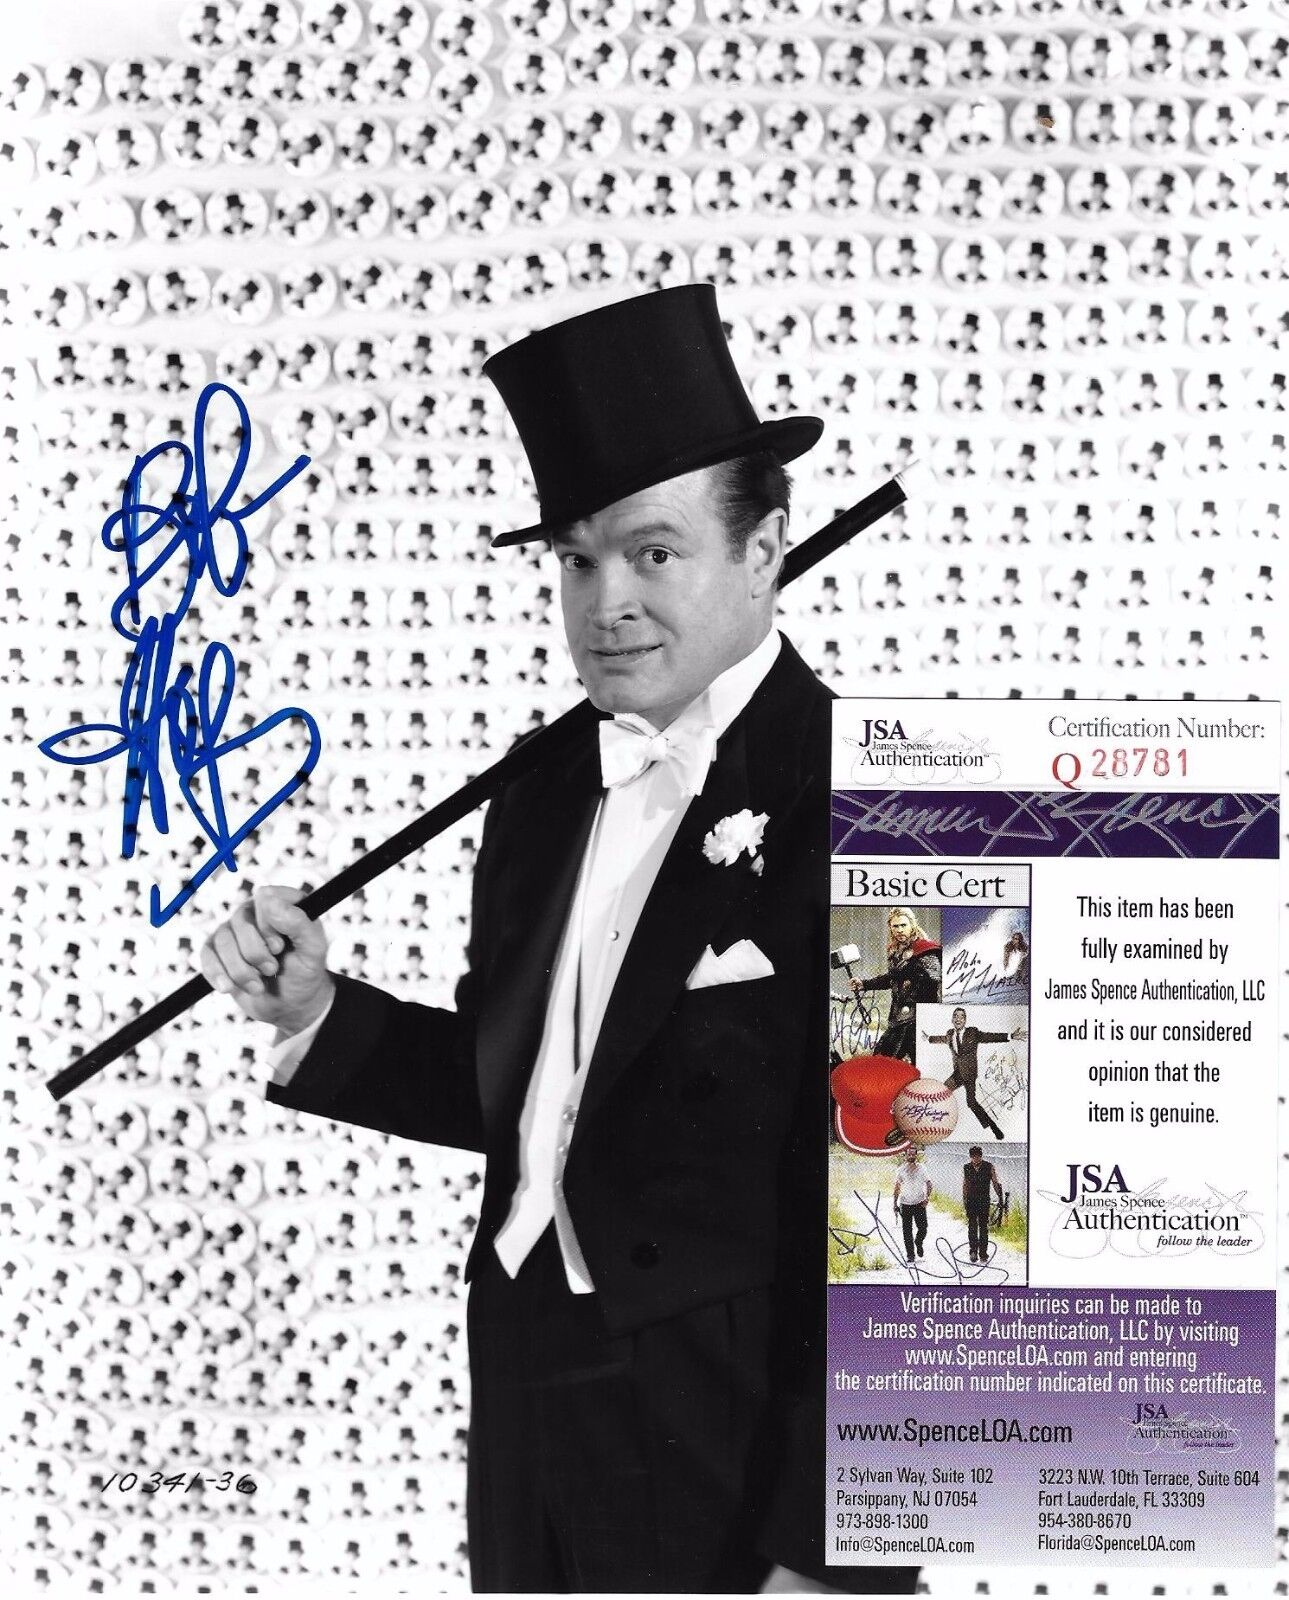 Signed Bob Hope OUTSTANDING Autographed 8x10 Photograph